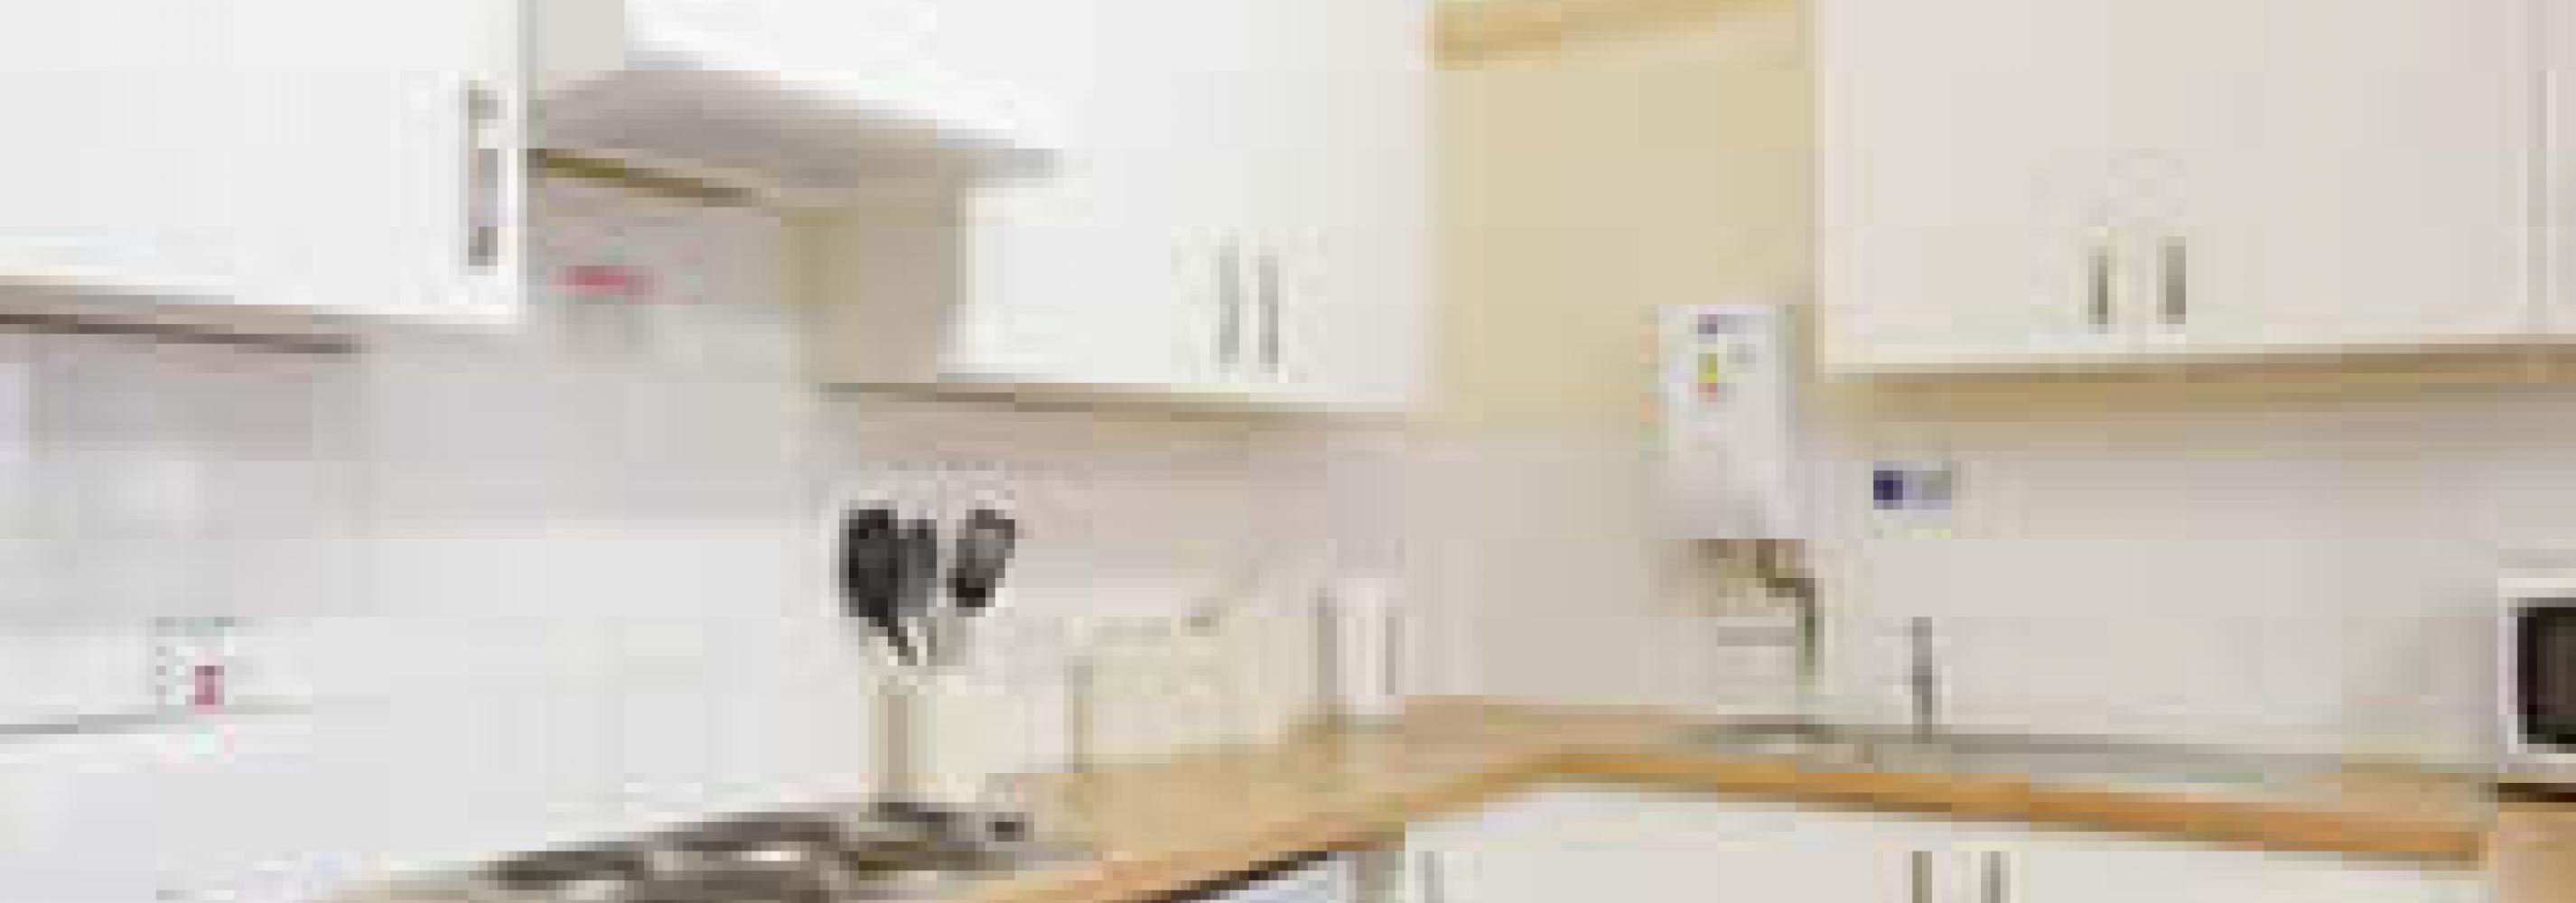 Kitchen with oven, hob, sink, microwave, kettle and toaster